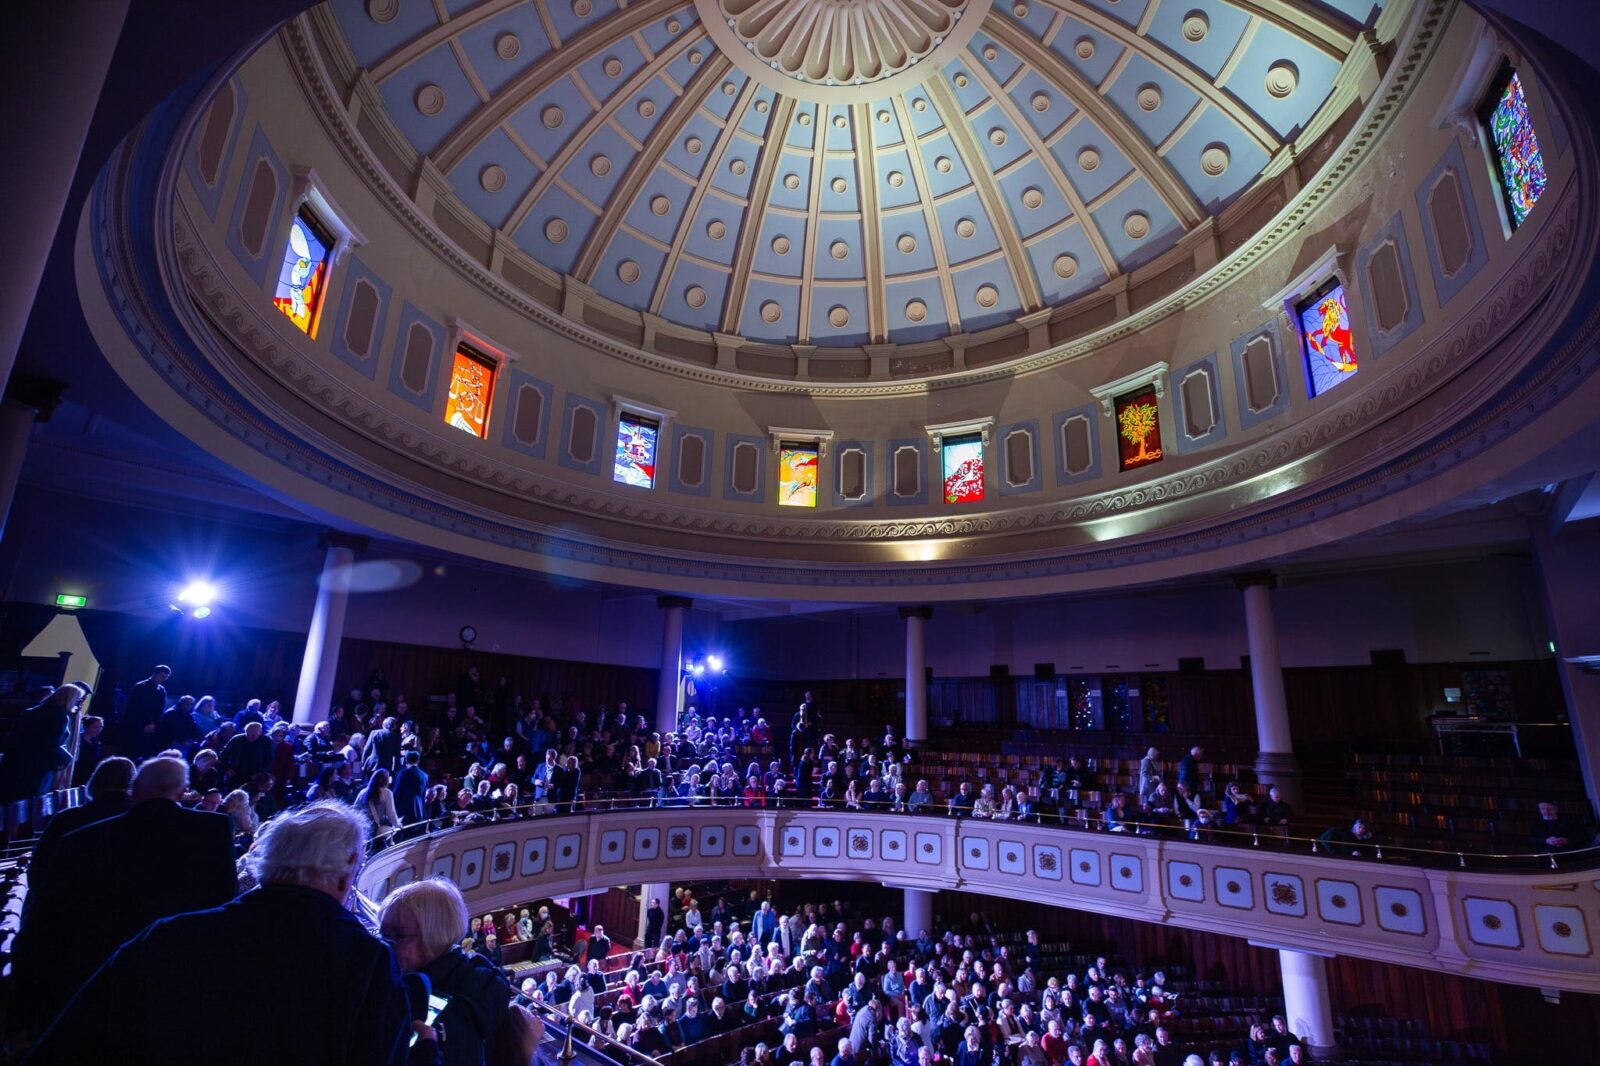 Image of full house at the Toorak synagogue, grand dome with stained glass windows.